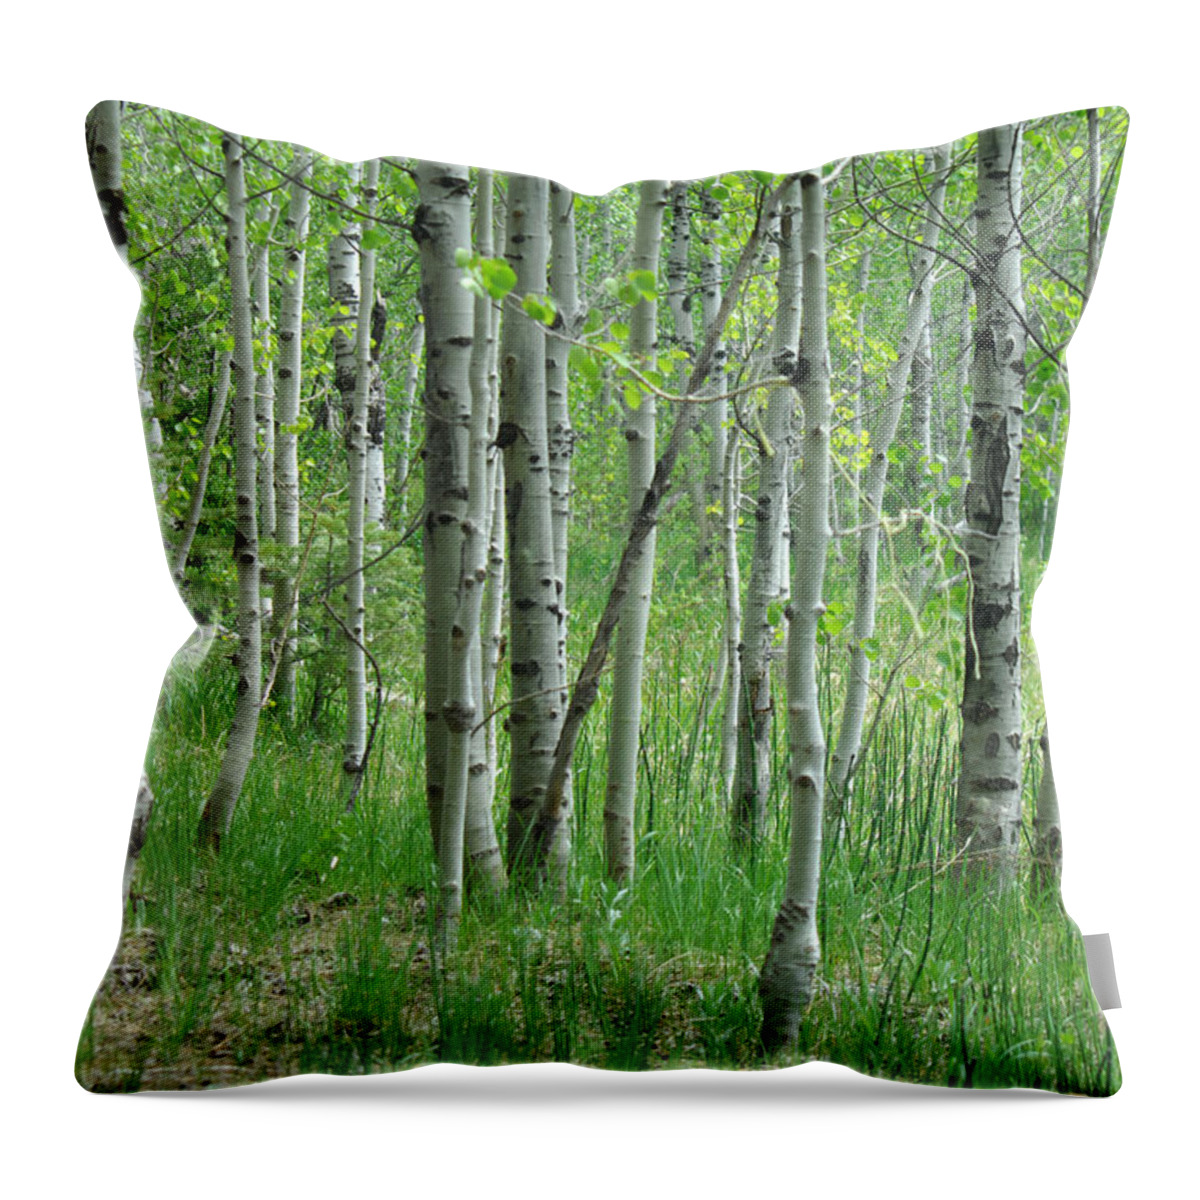 Tree Throw Pillow featuring the photograph Field Of Teens by Donna Blackhall